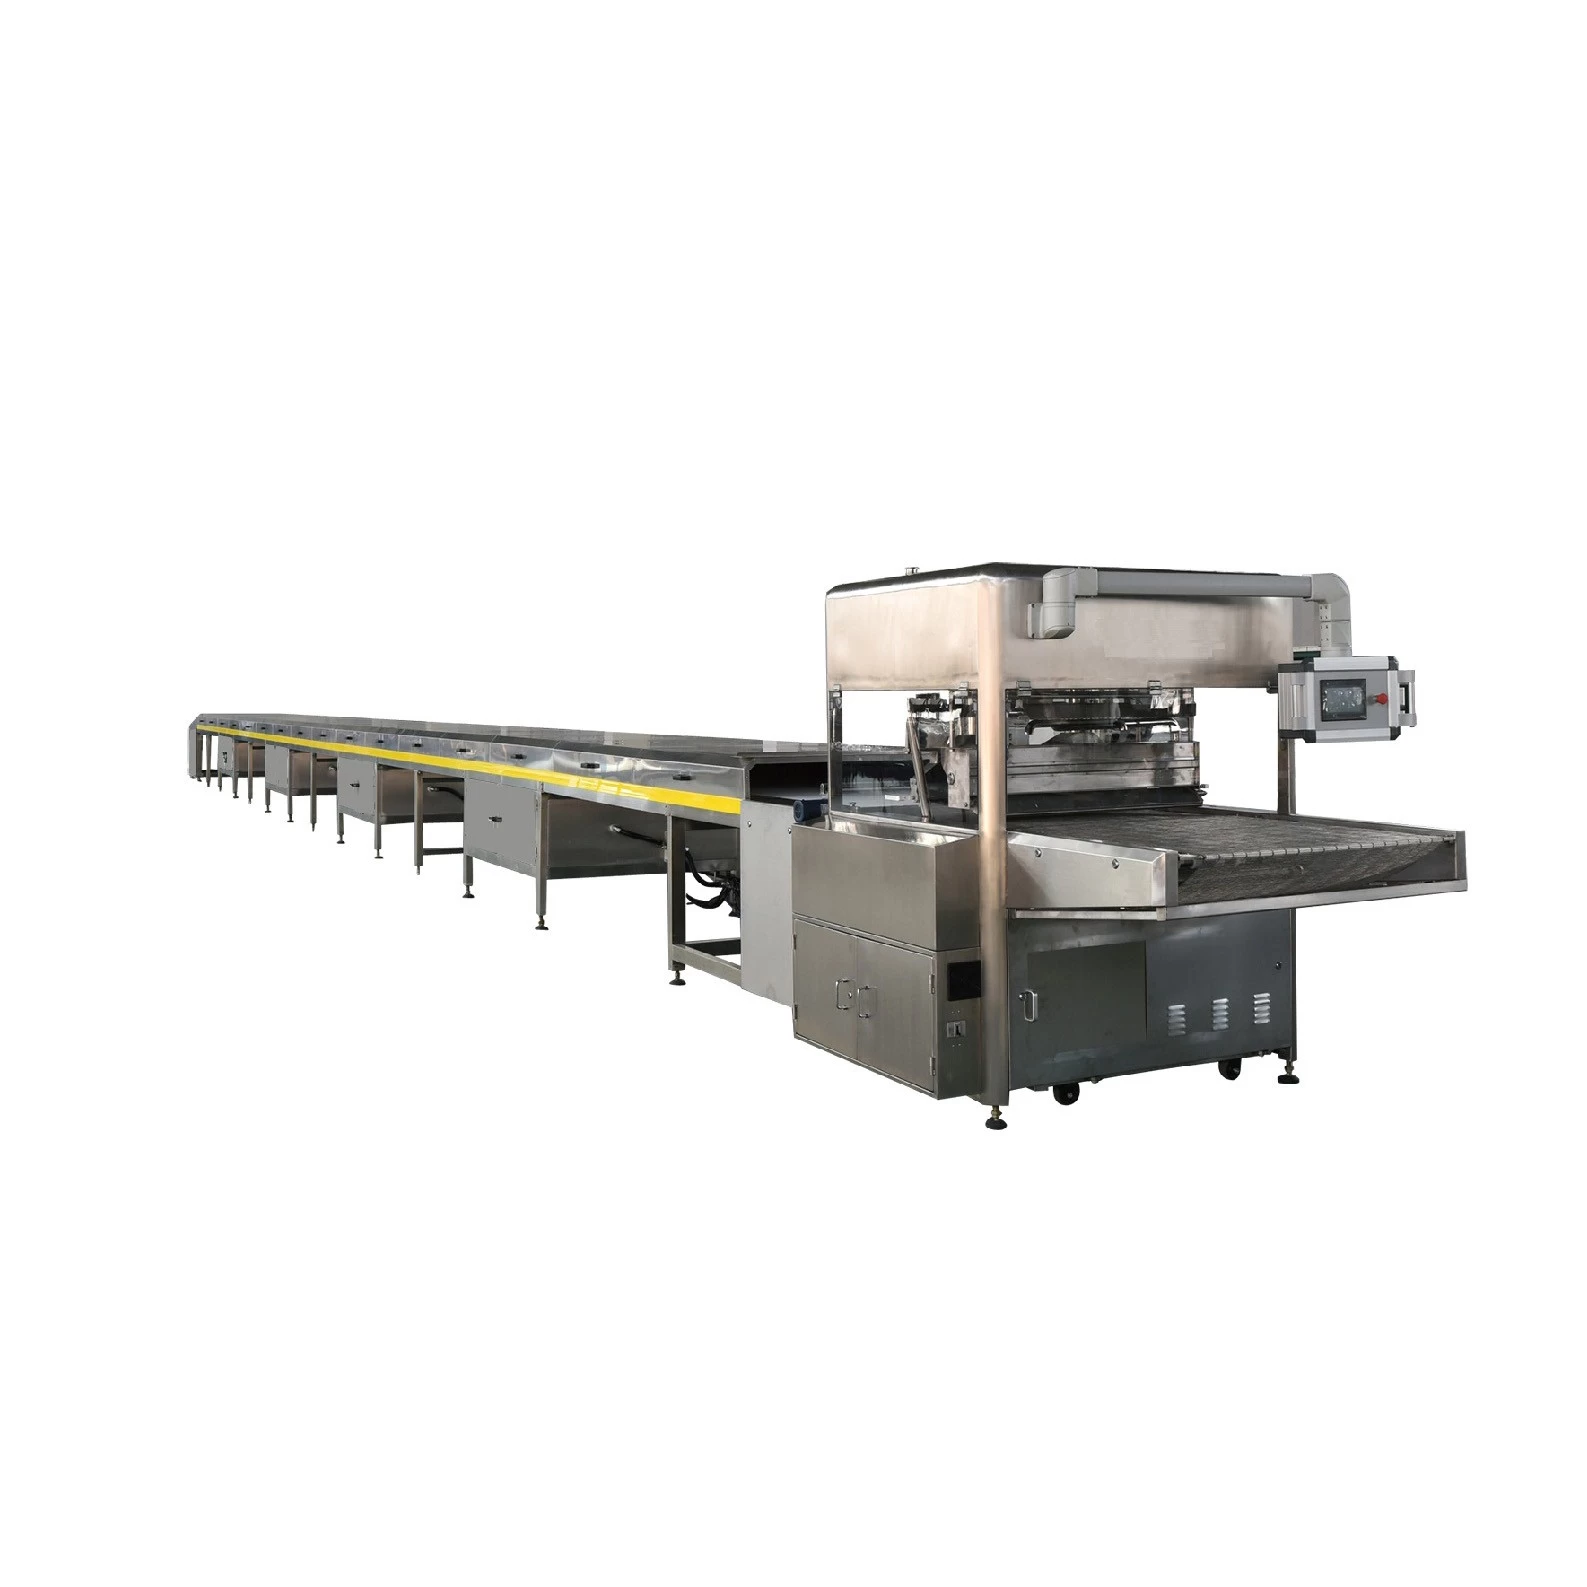 China mini chocolate enrobing coating machine small chocolate making line for bar wafers biscuit production fabrikant